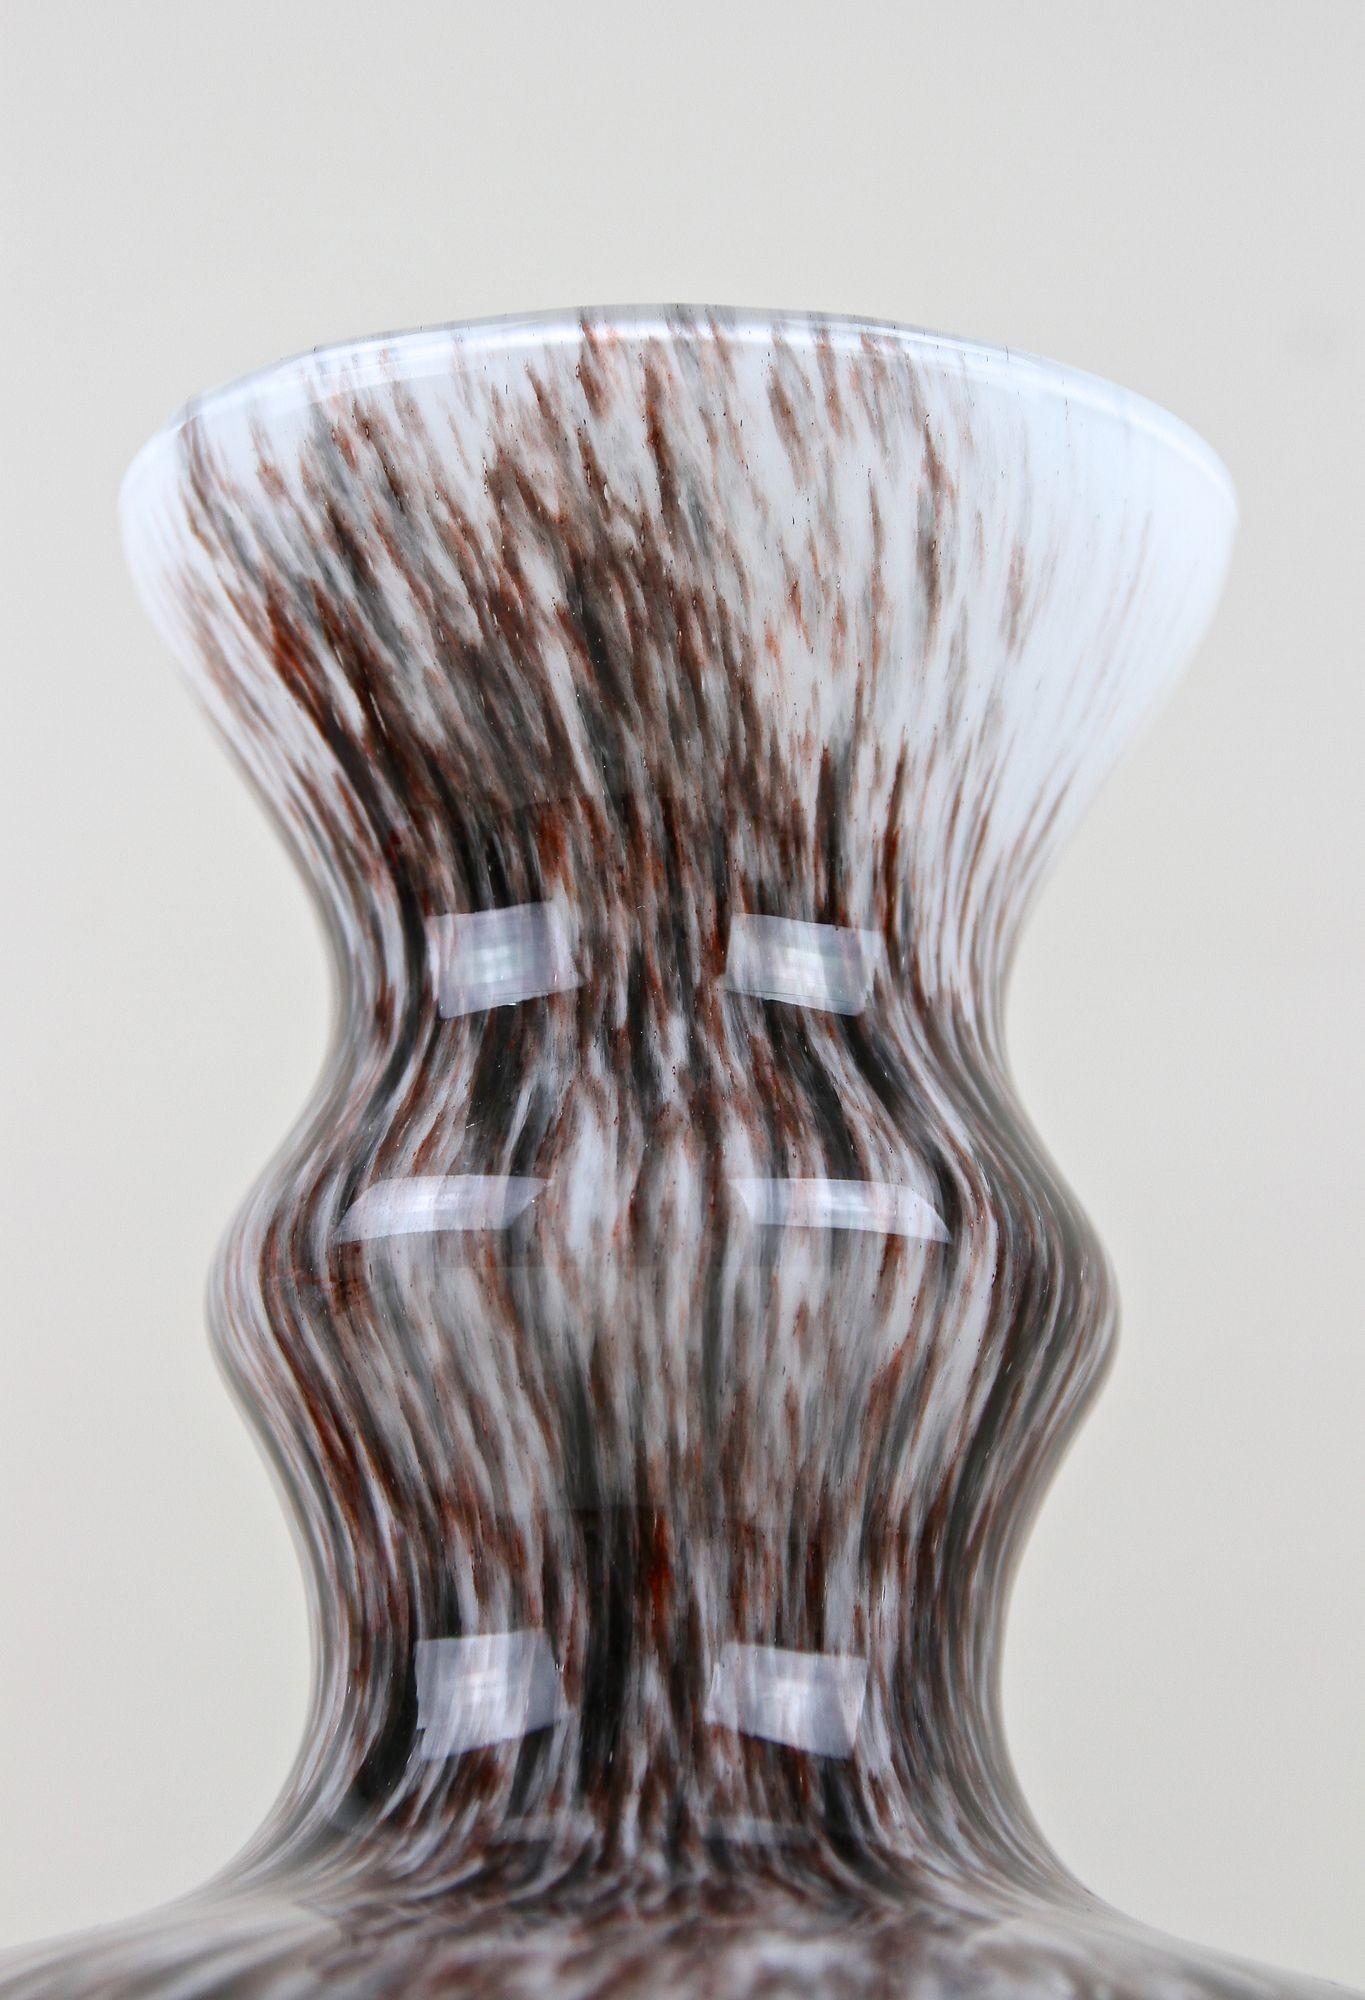 Bulbous Murano Glass Vase With Brown, Grey & Black Tones, Italy circa 1970 For Sale 7